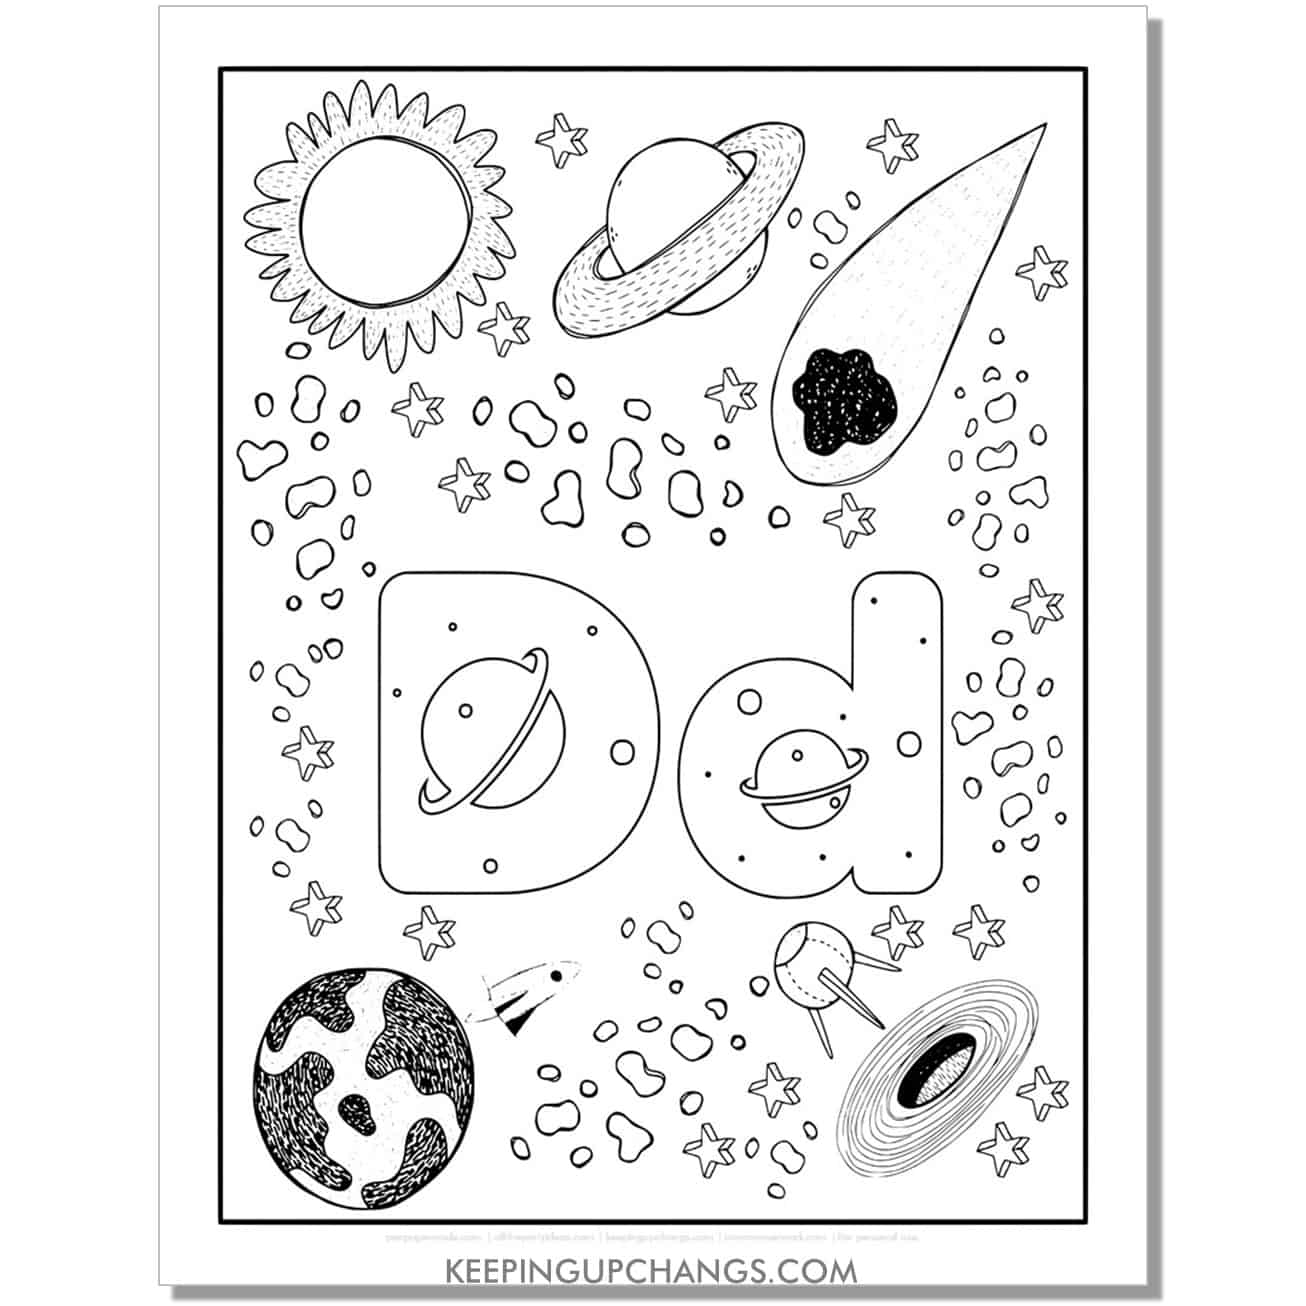 free alphabet letter d coloring page for kids with rockets, space theme.